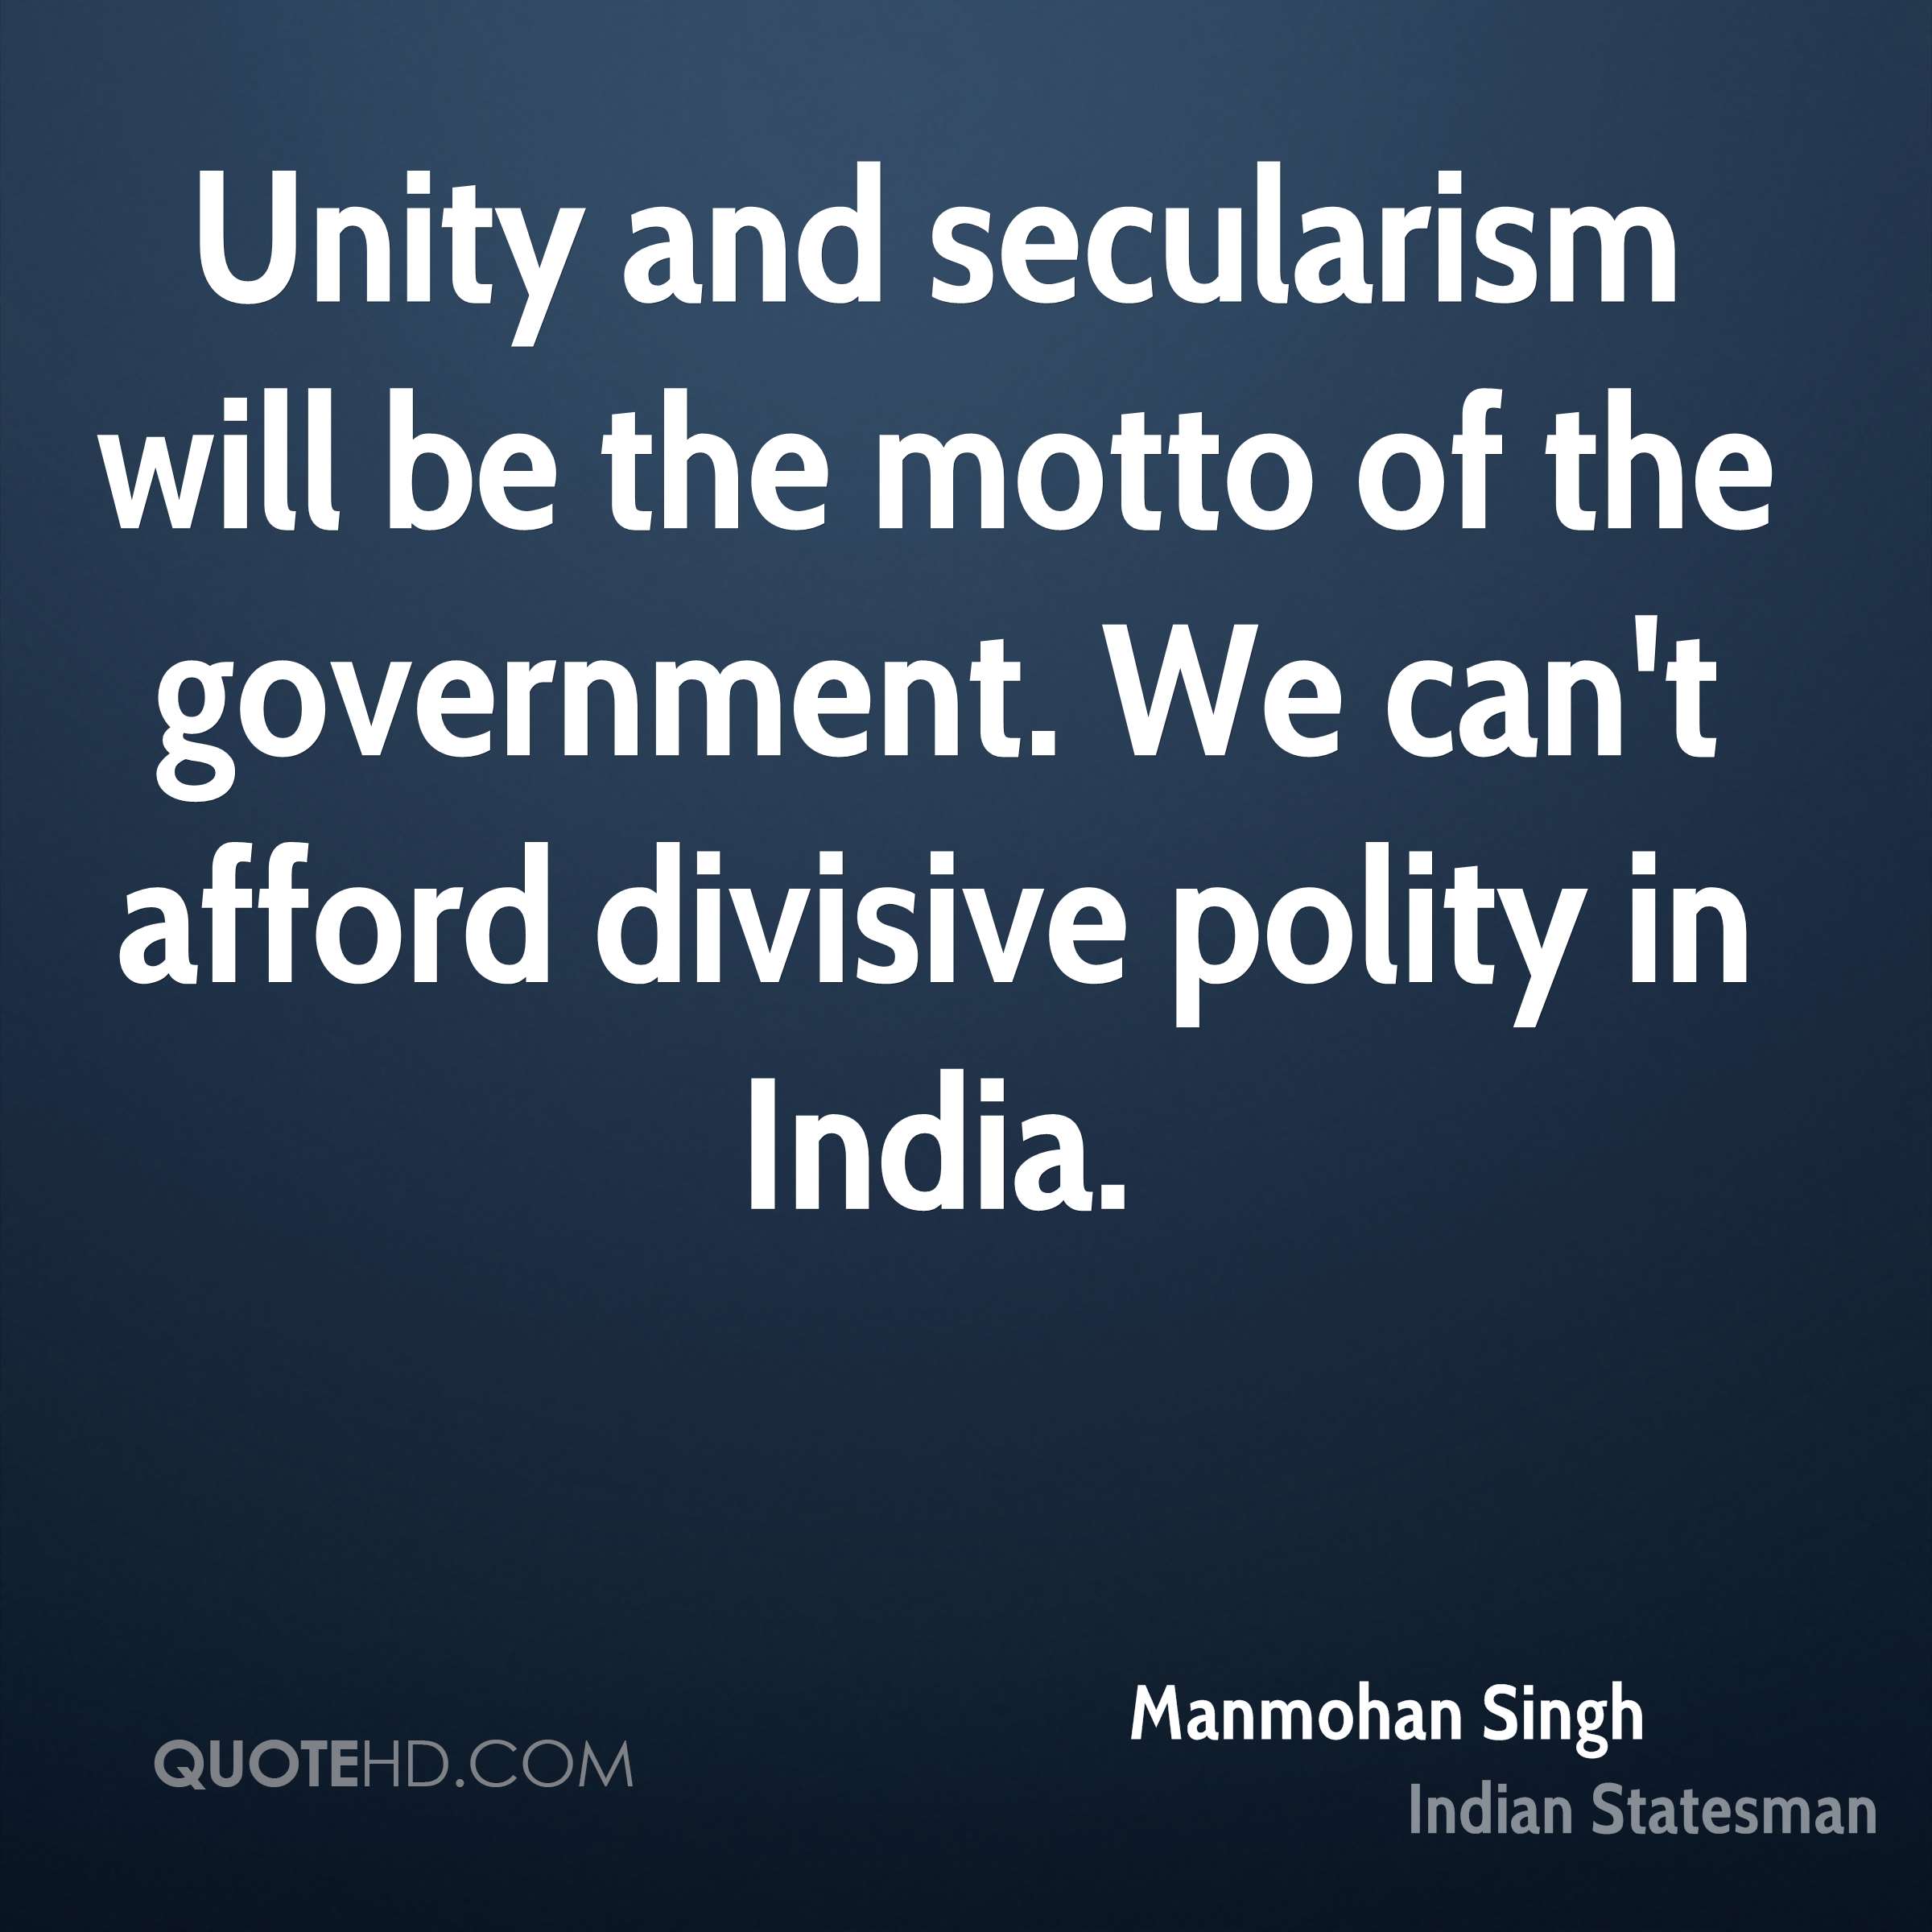 Unity and secularism will be the motto of the government. We can’t afford divisive polity in India.